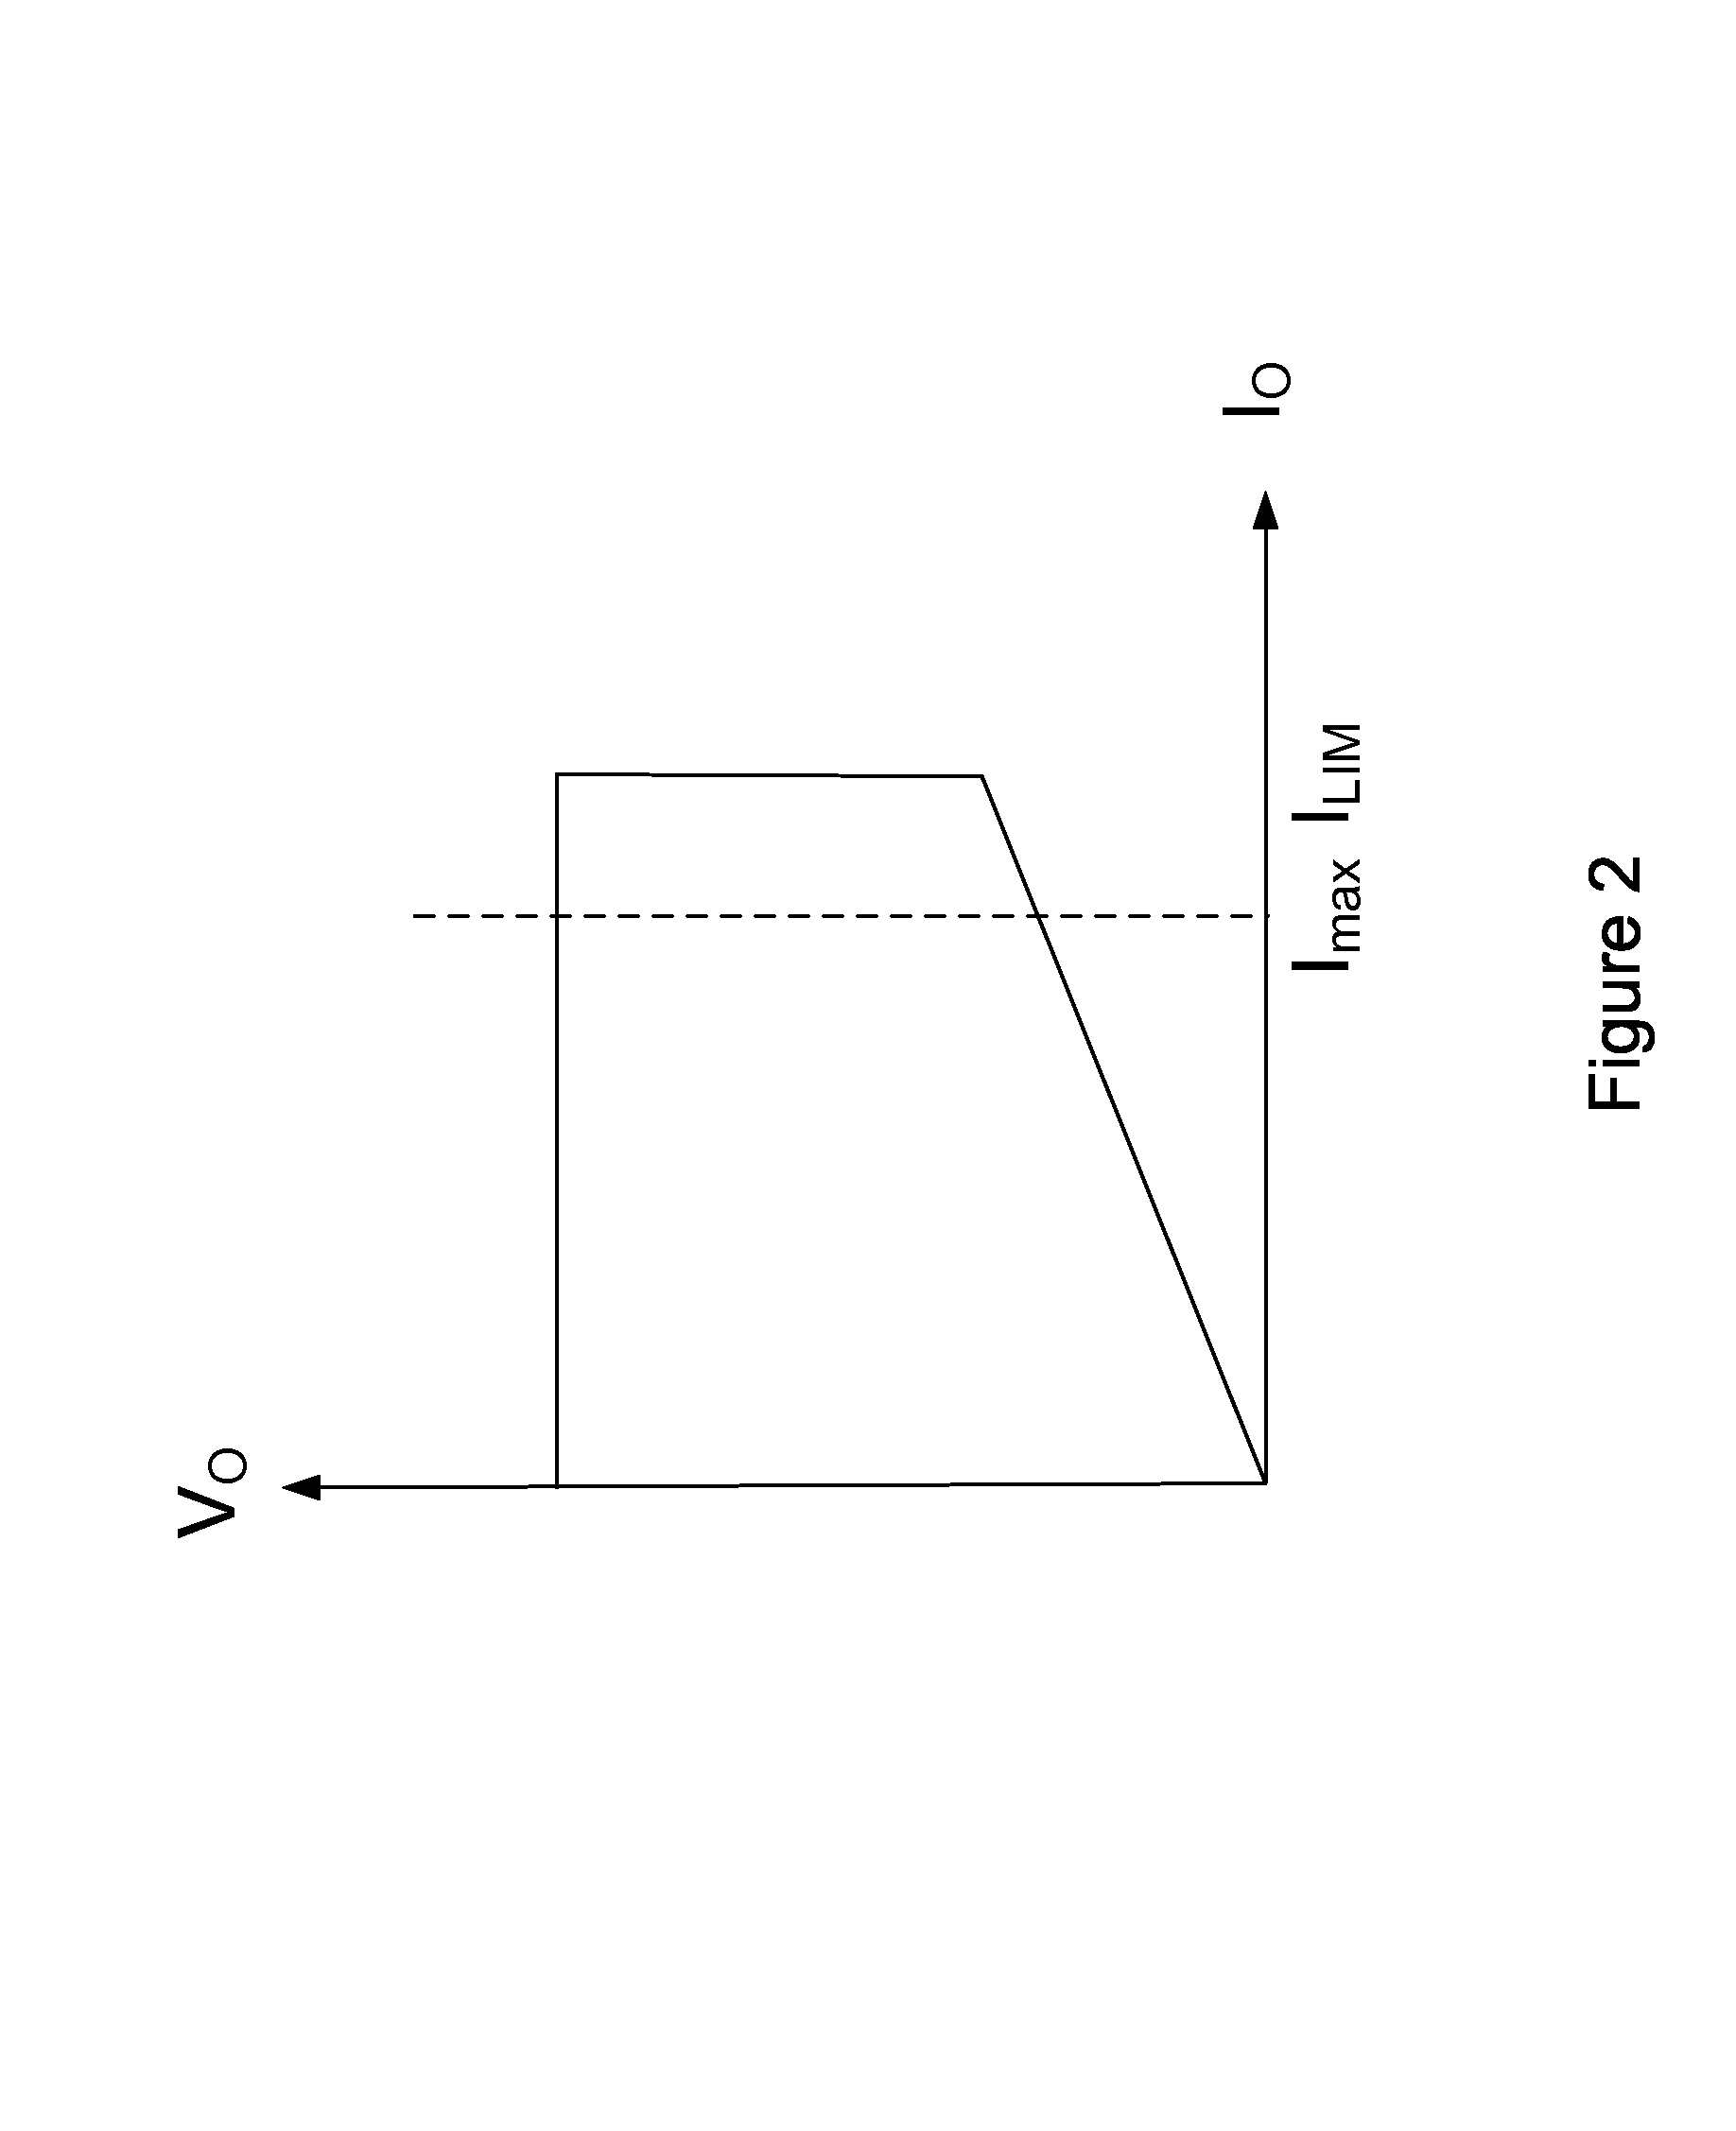 On-time control for constant current mode in a flyback power supply